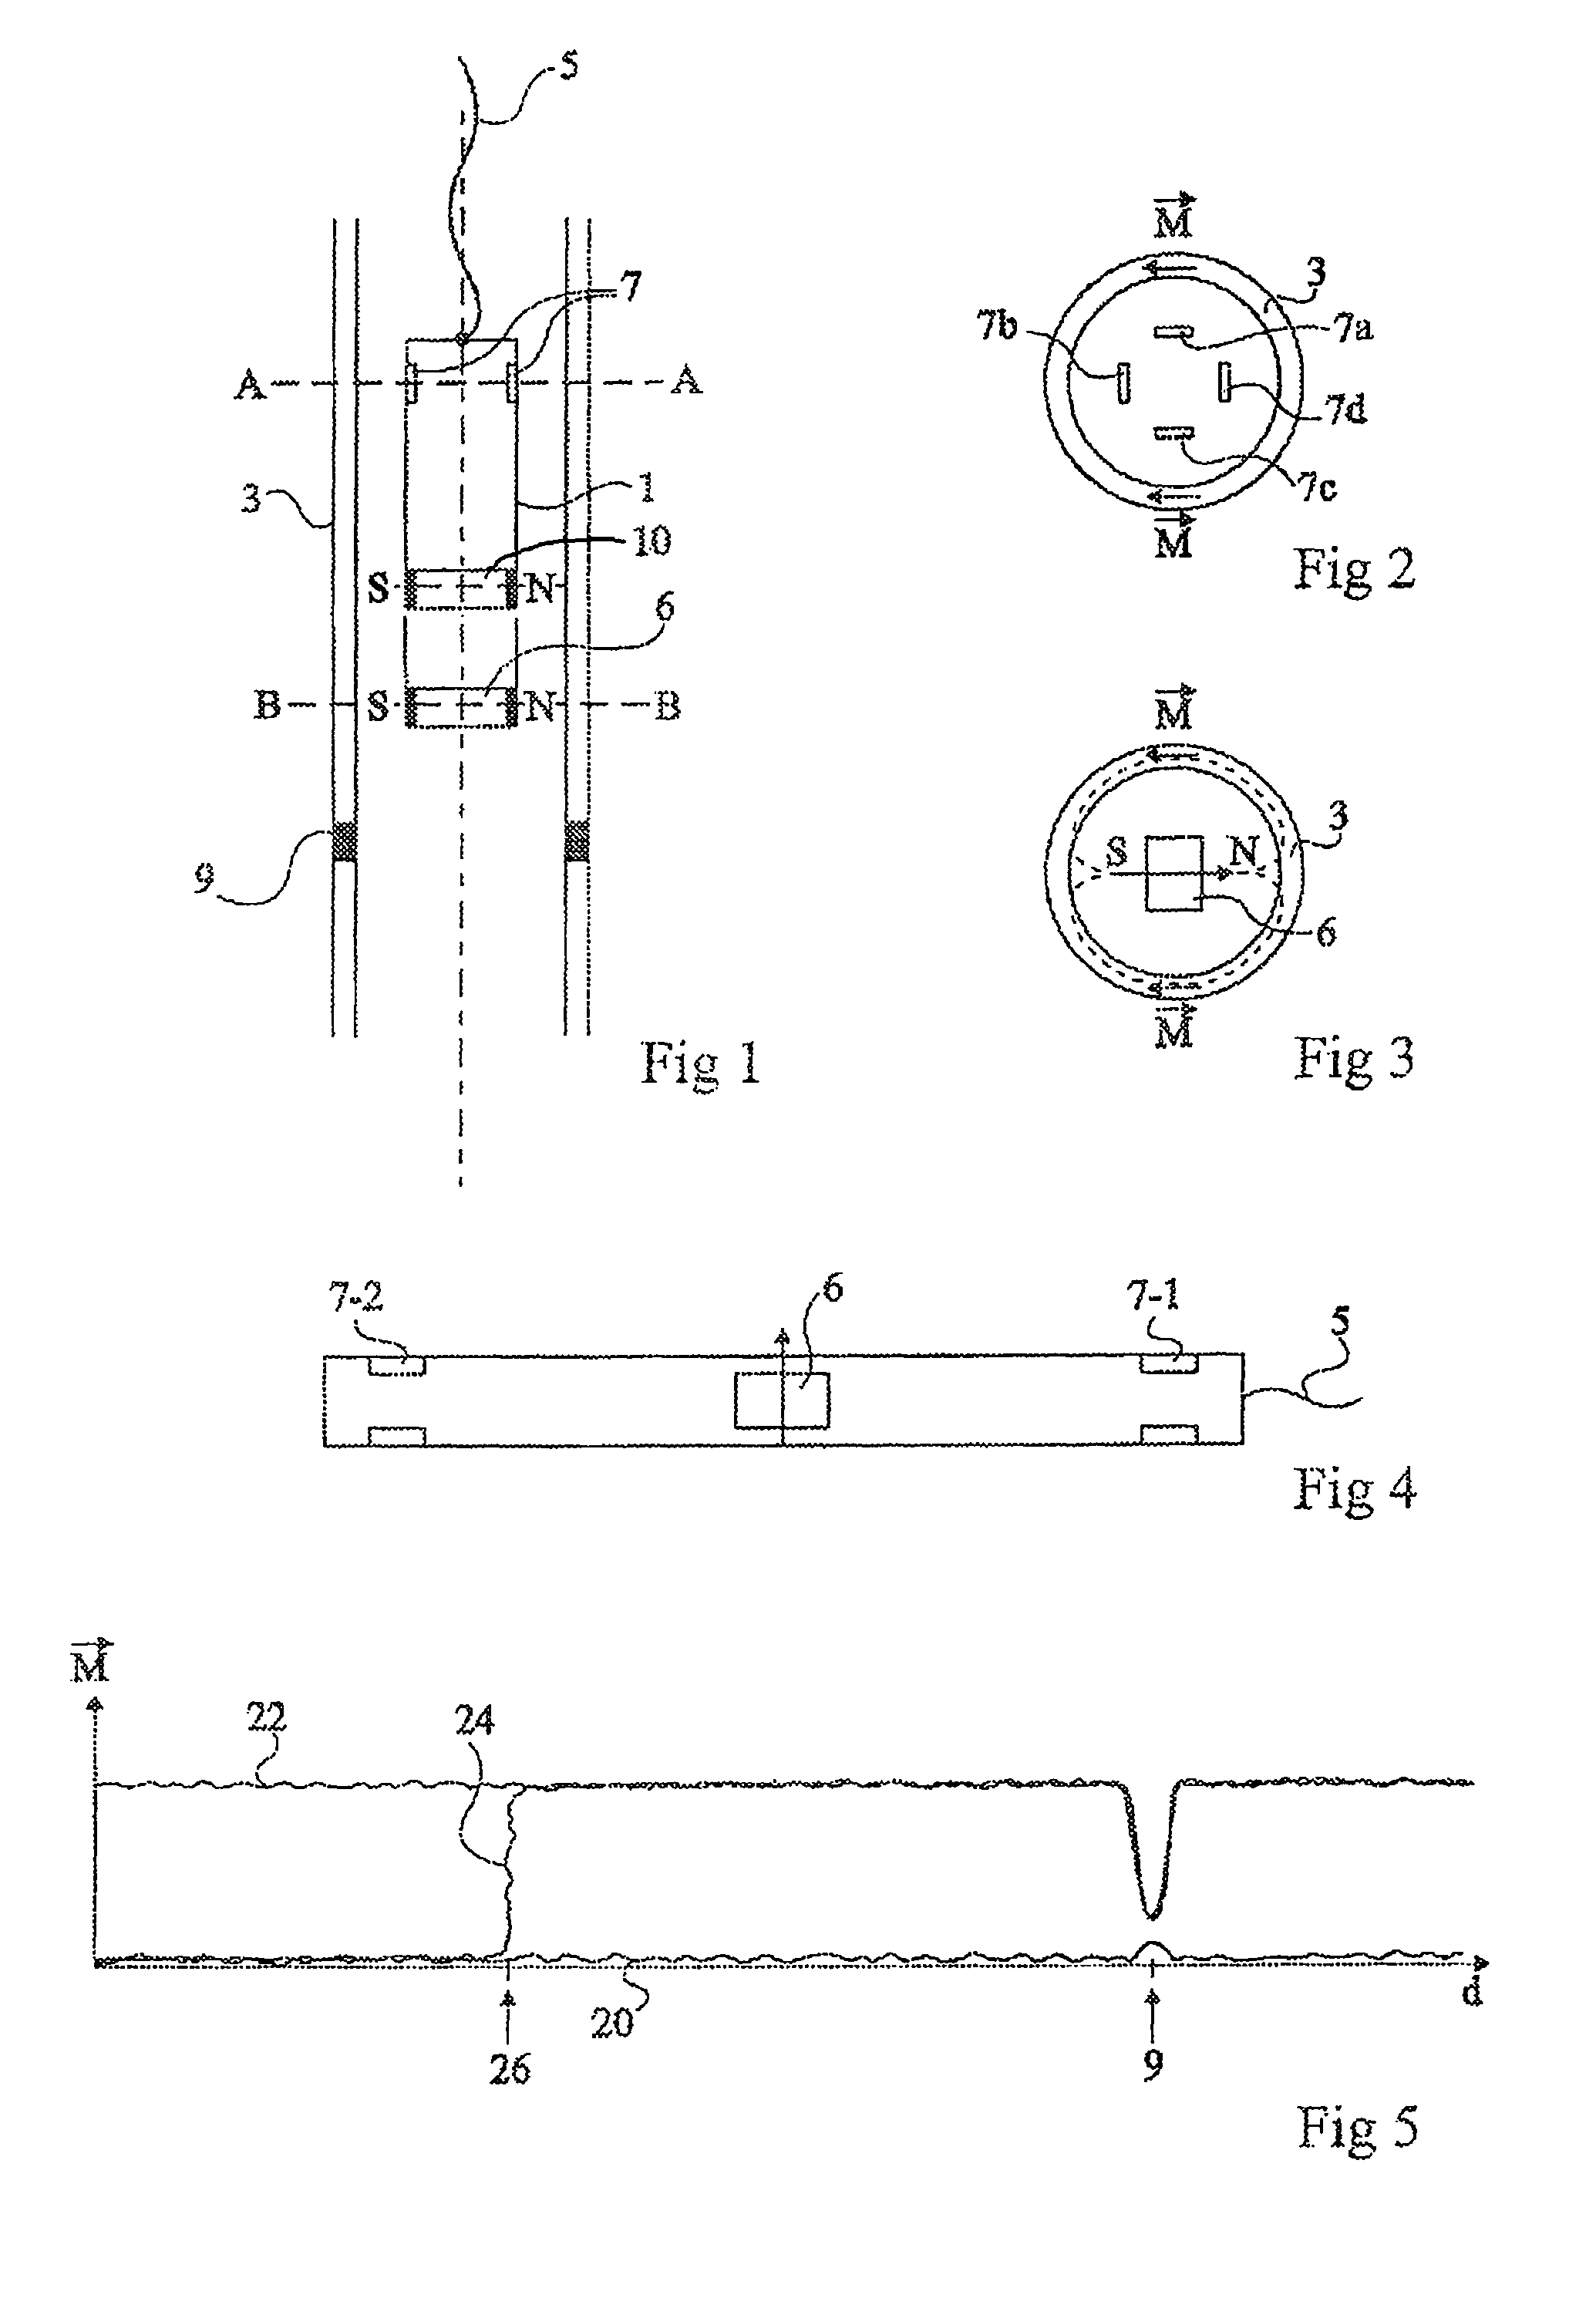 Probe for analysis of a string of rods or tubes in a well